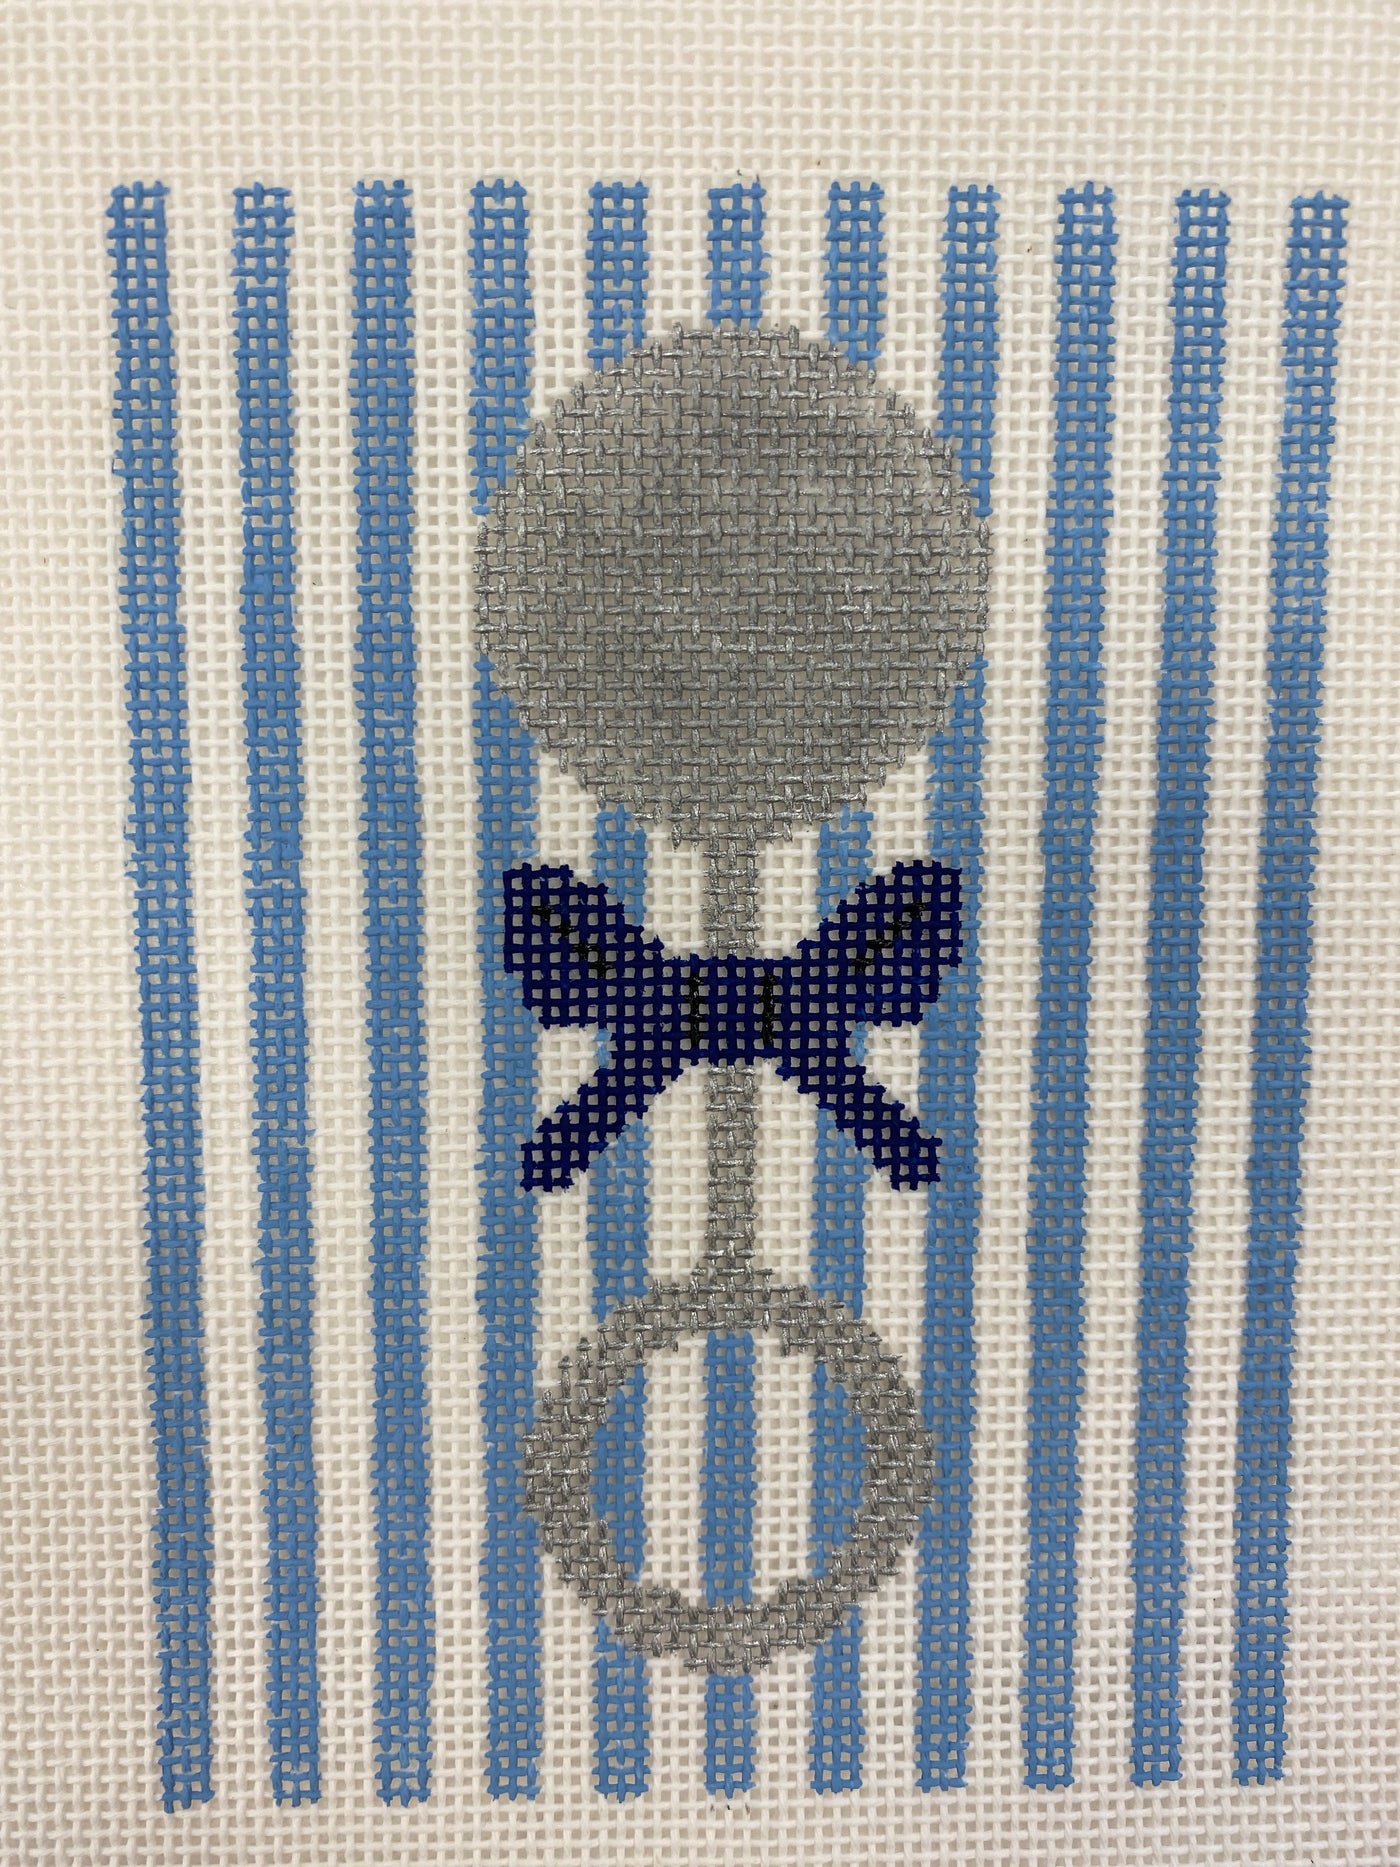 Sterling Silver Baby Rattle-Blue Silver Stitch Handpainted Needlepoint Canvas Size: 3.5" x 5" / 18 Mesh